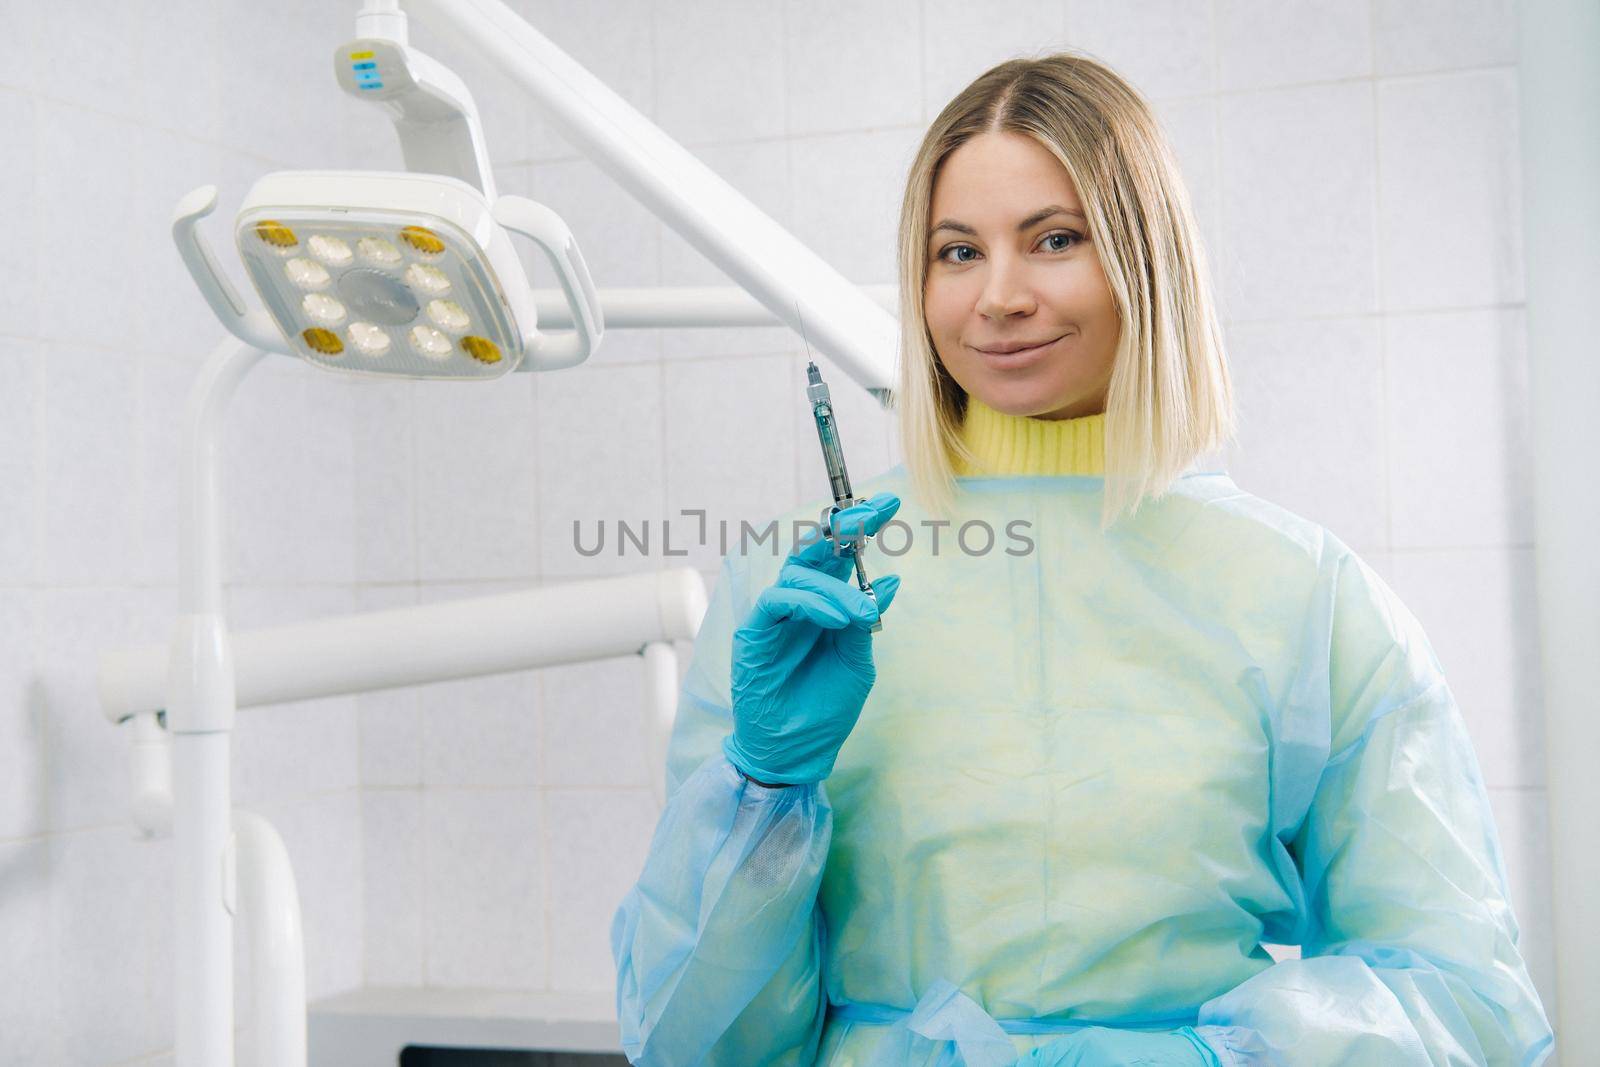 The dentist holds an injection syringe for the patient in the office by Lobachad